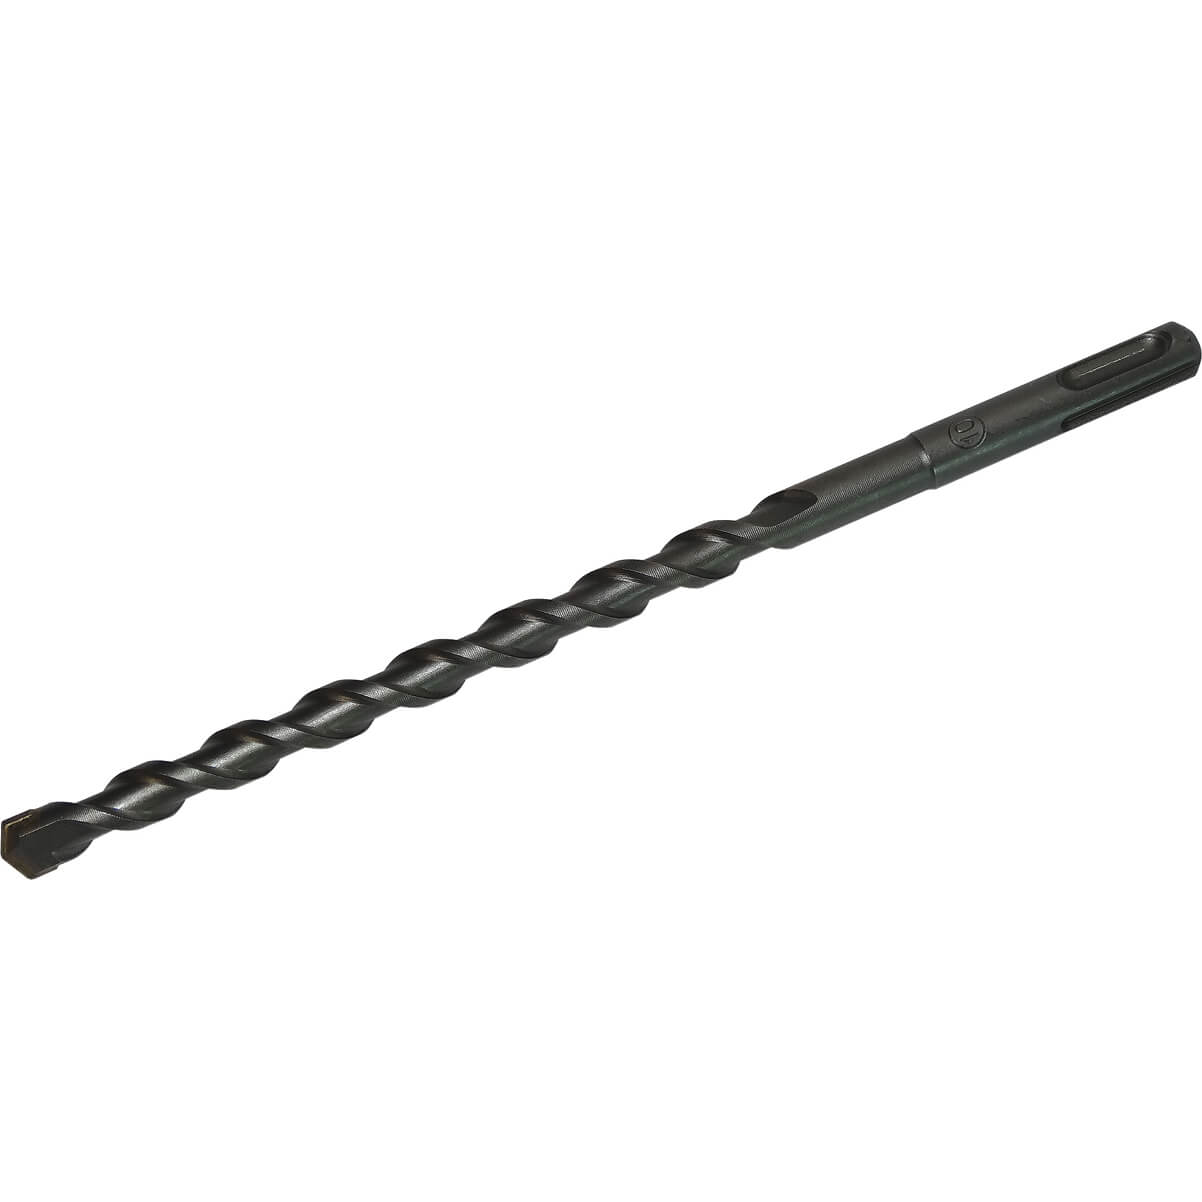 Image of CK SDS Plus Masonry Drill Bit 14mm 260mm Pack of 1